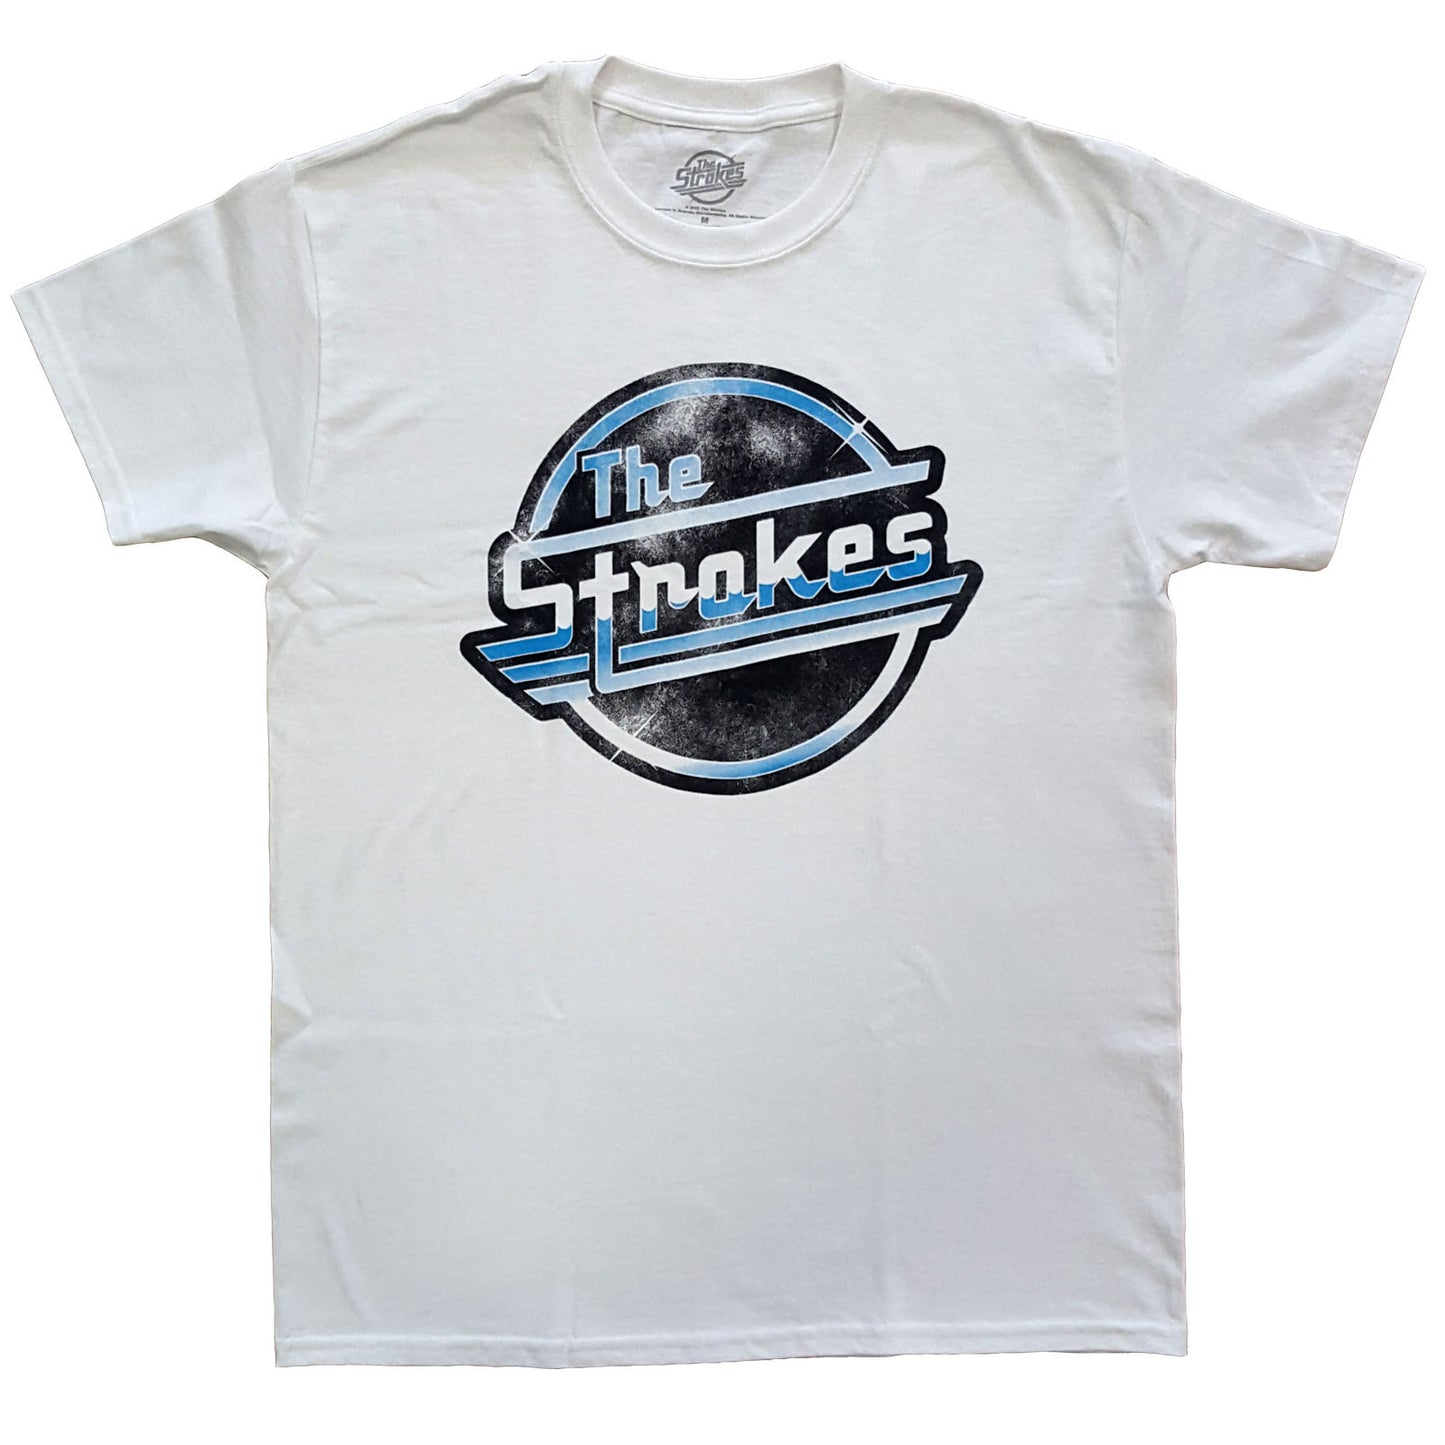 The Strokes T-Shirt: Distressed OG Magna